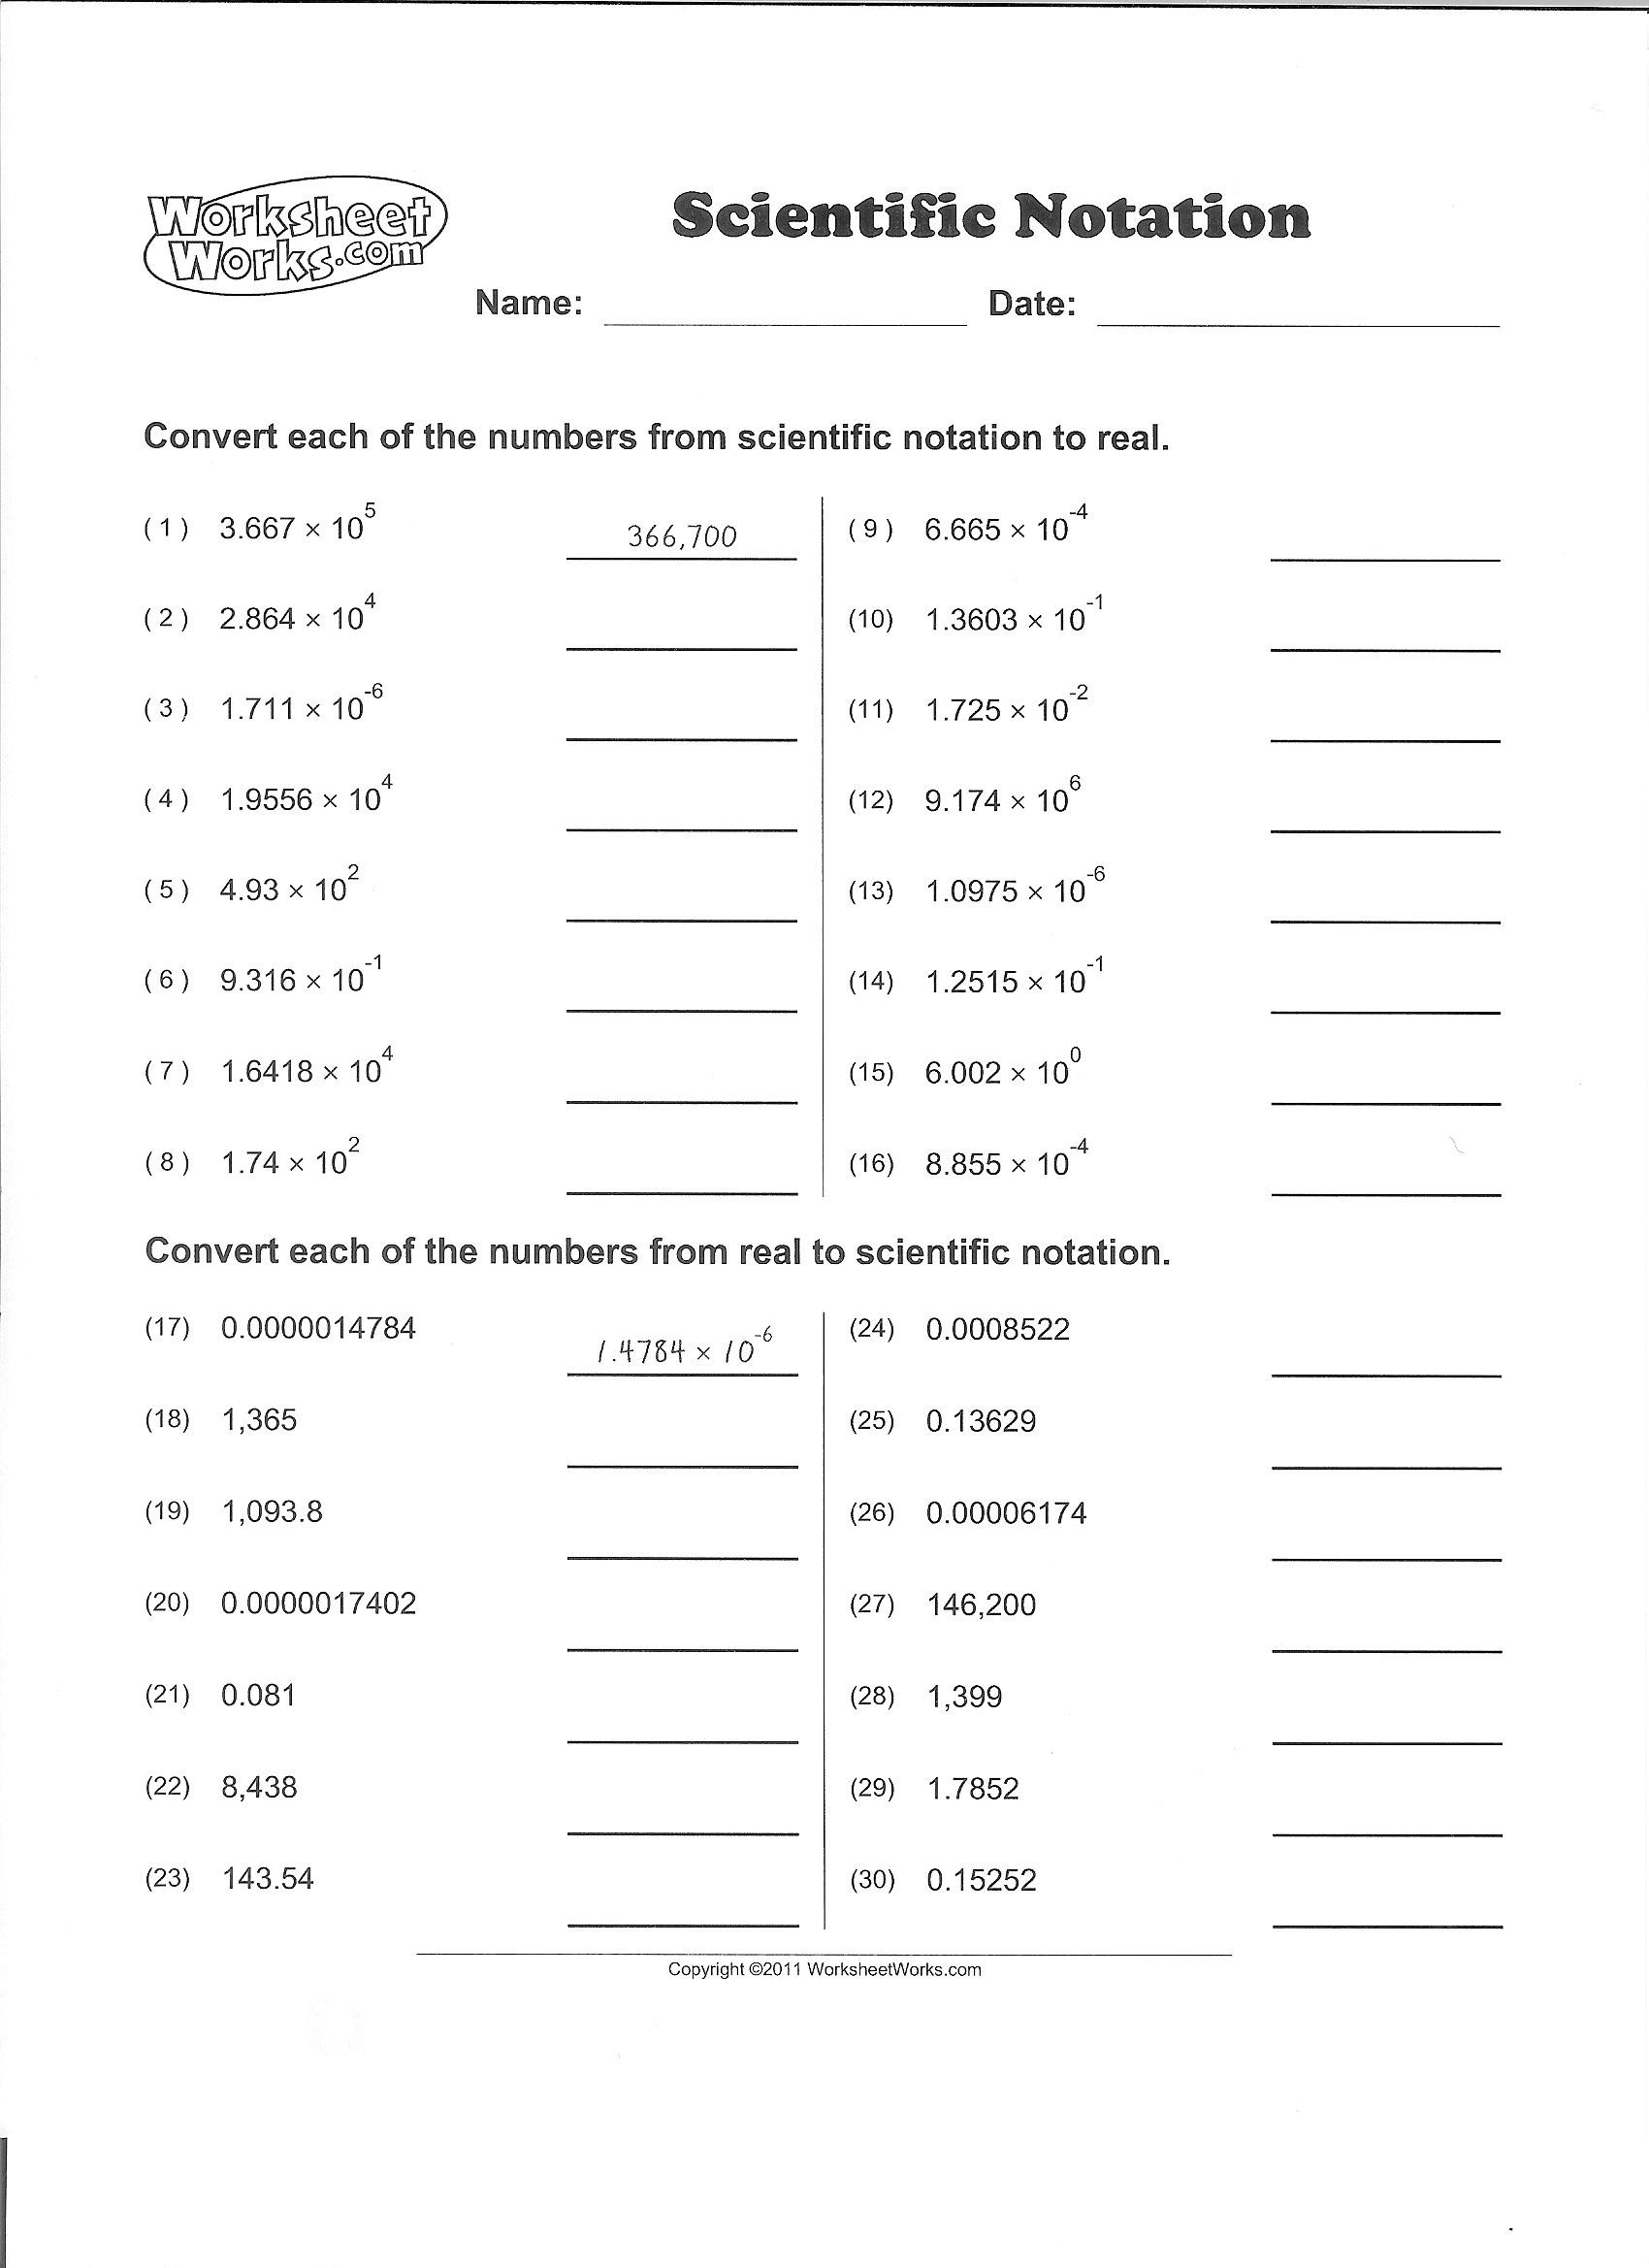 Scientific Notation Worksheet with Answers Worksheet Scientific Notation 1 16